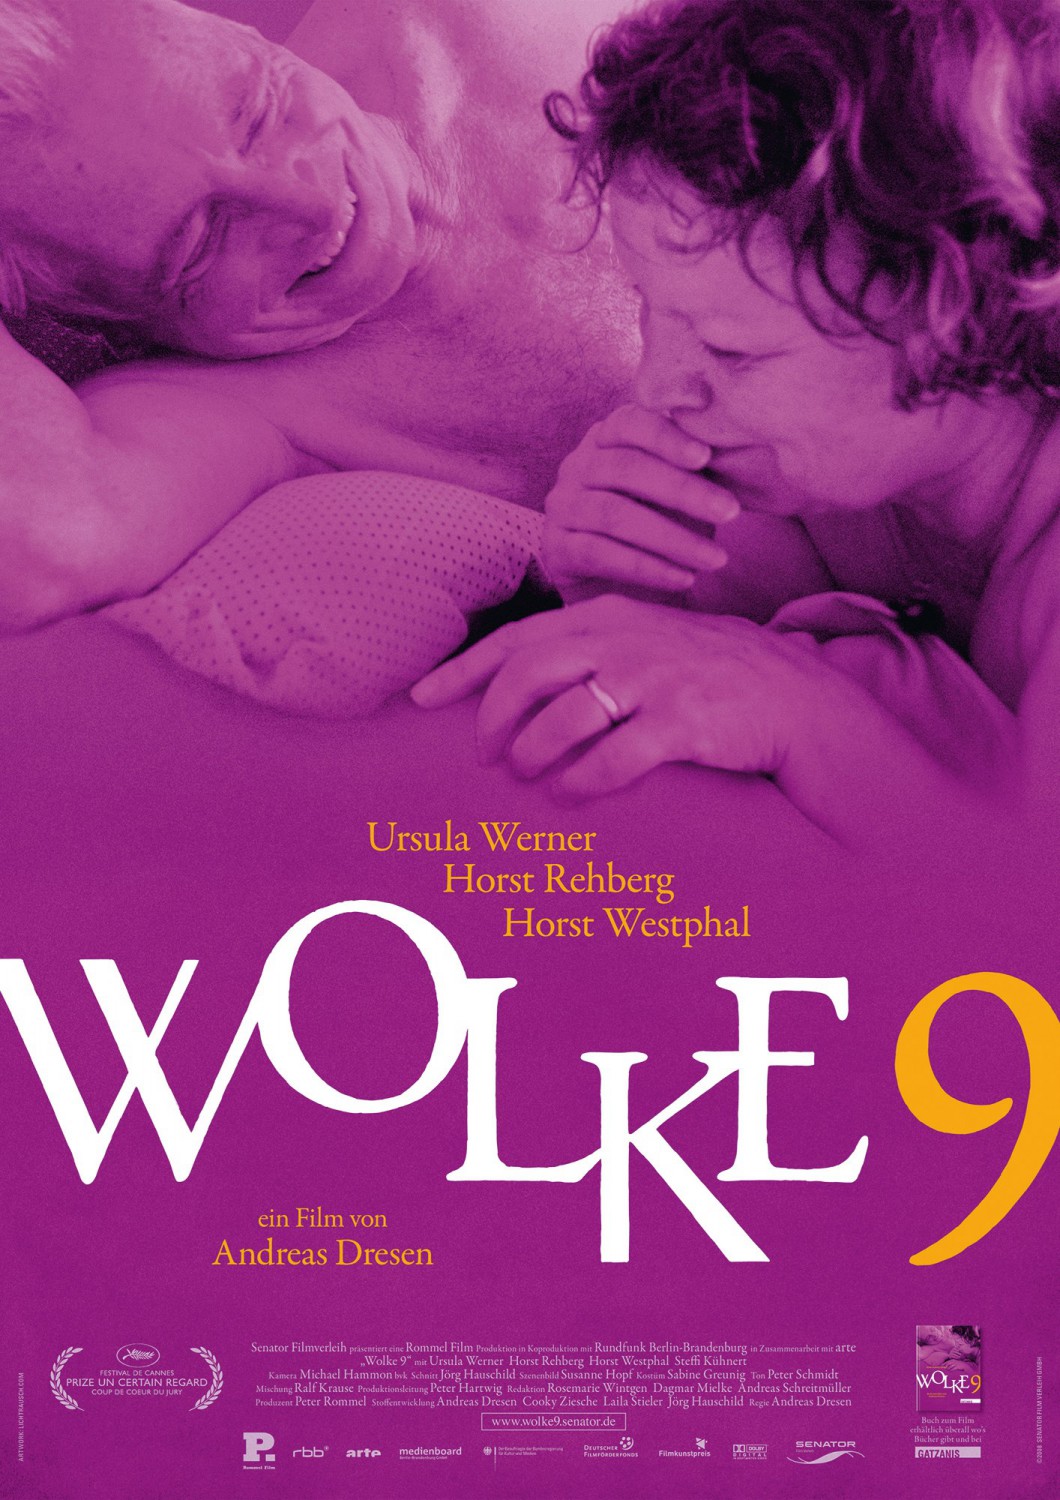 Extra Large Movie Poster Image for Wolke Neun (#1 of 3)